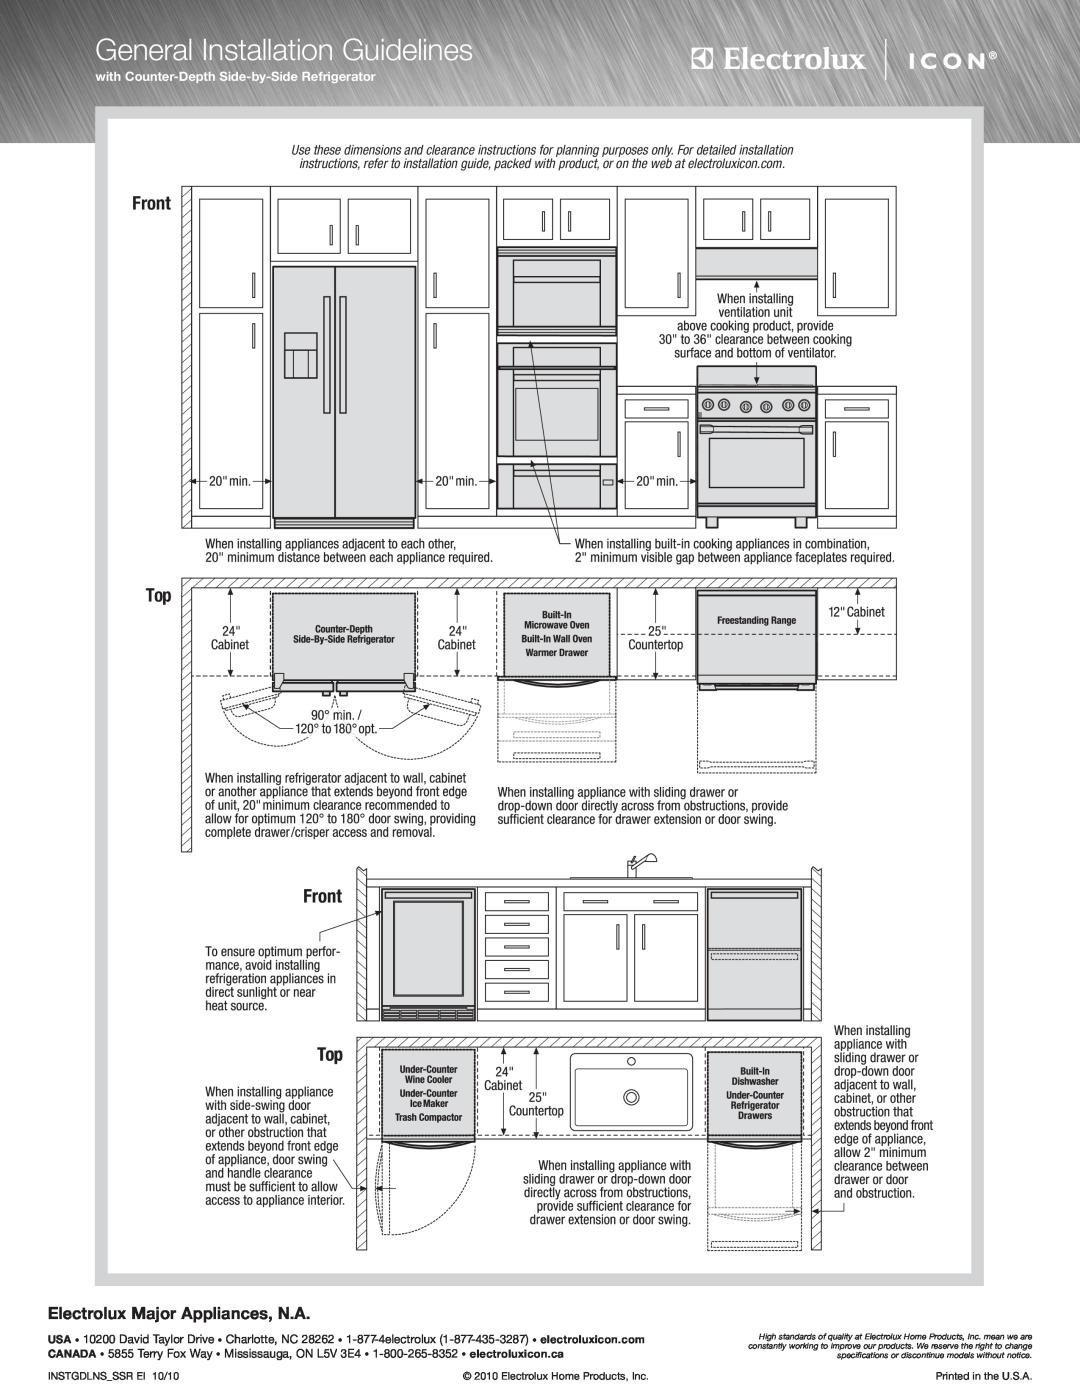 Electrolux E23CS78HSS specifications General Installation Guidelines, Electrolux Major Appliances, N.A, Front 